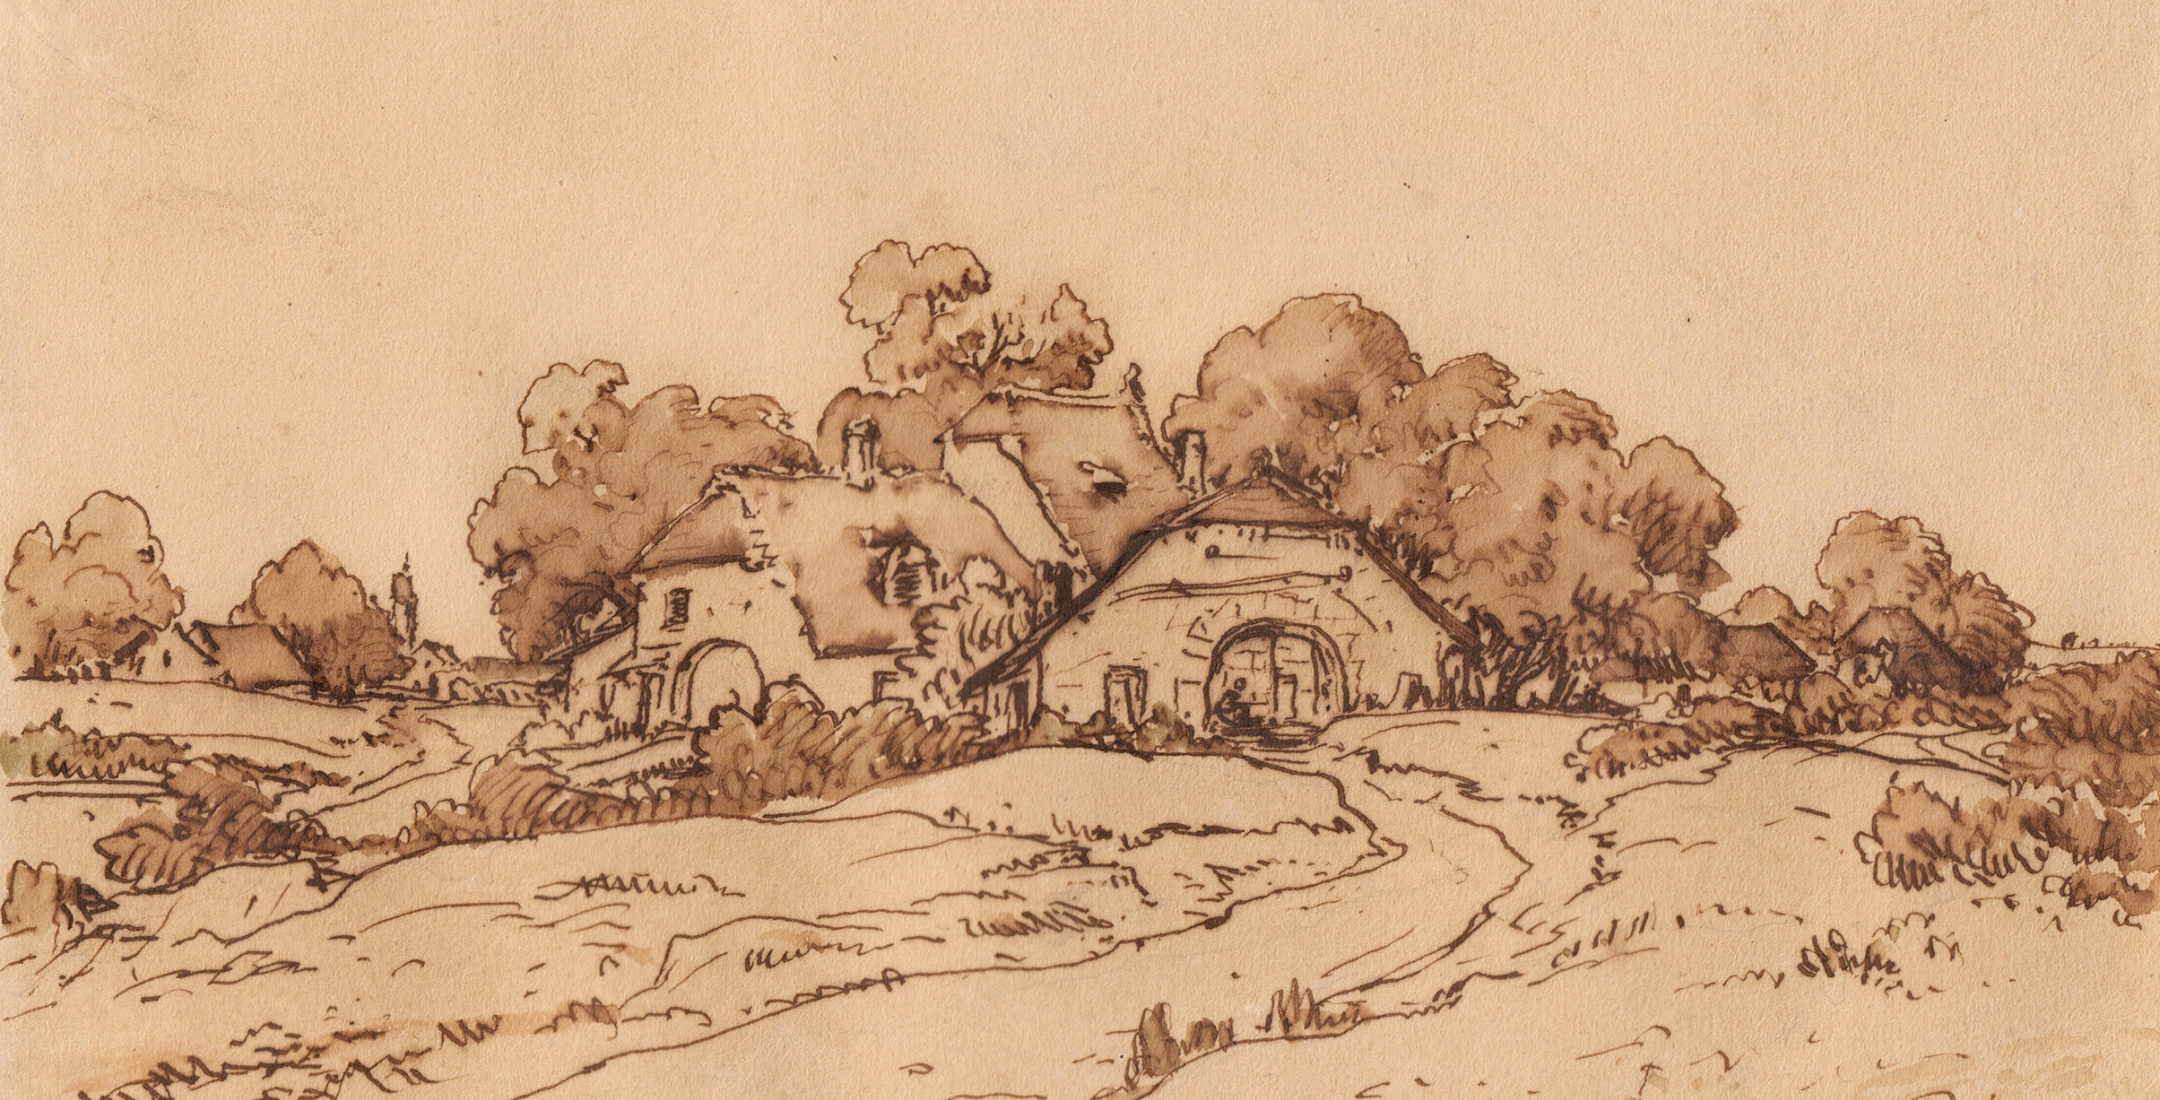 Houses Under the Trees, c. 1860-62     Pen and brown ink on paper 12 1/4 x 8 1/4 inches